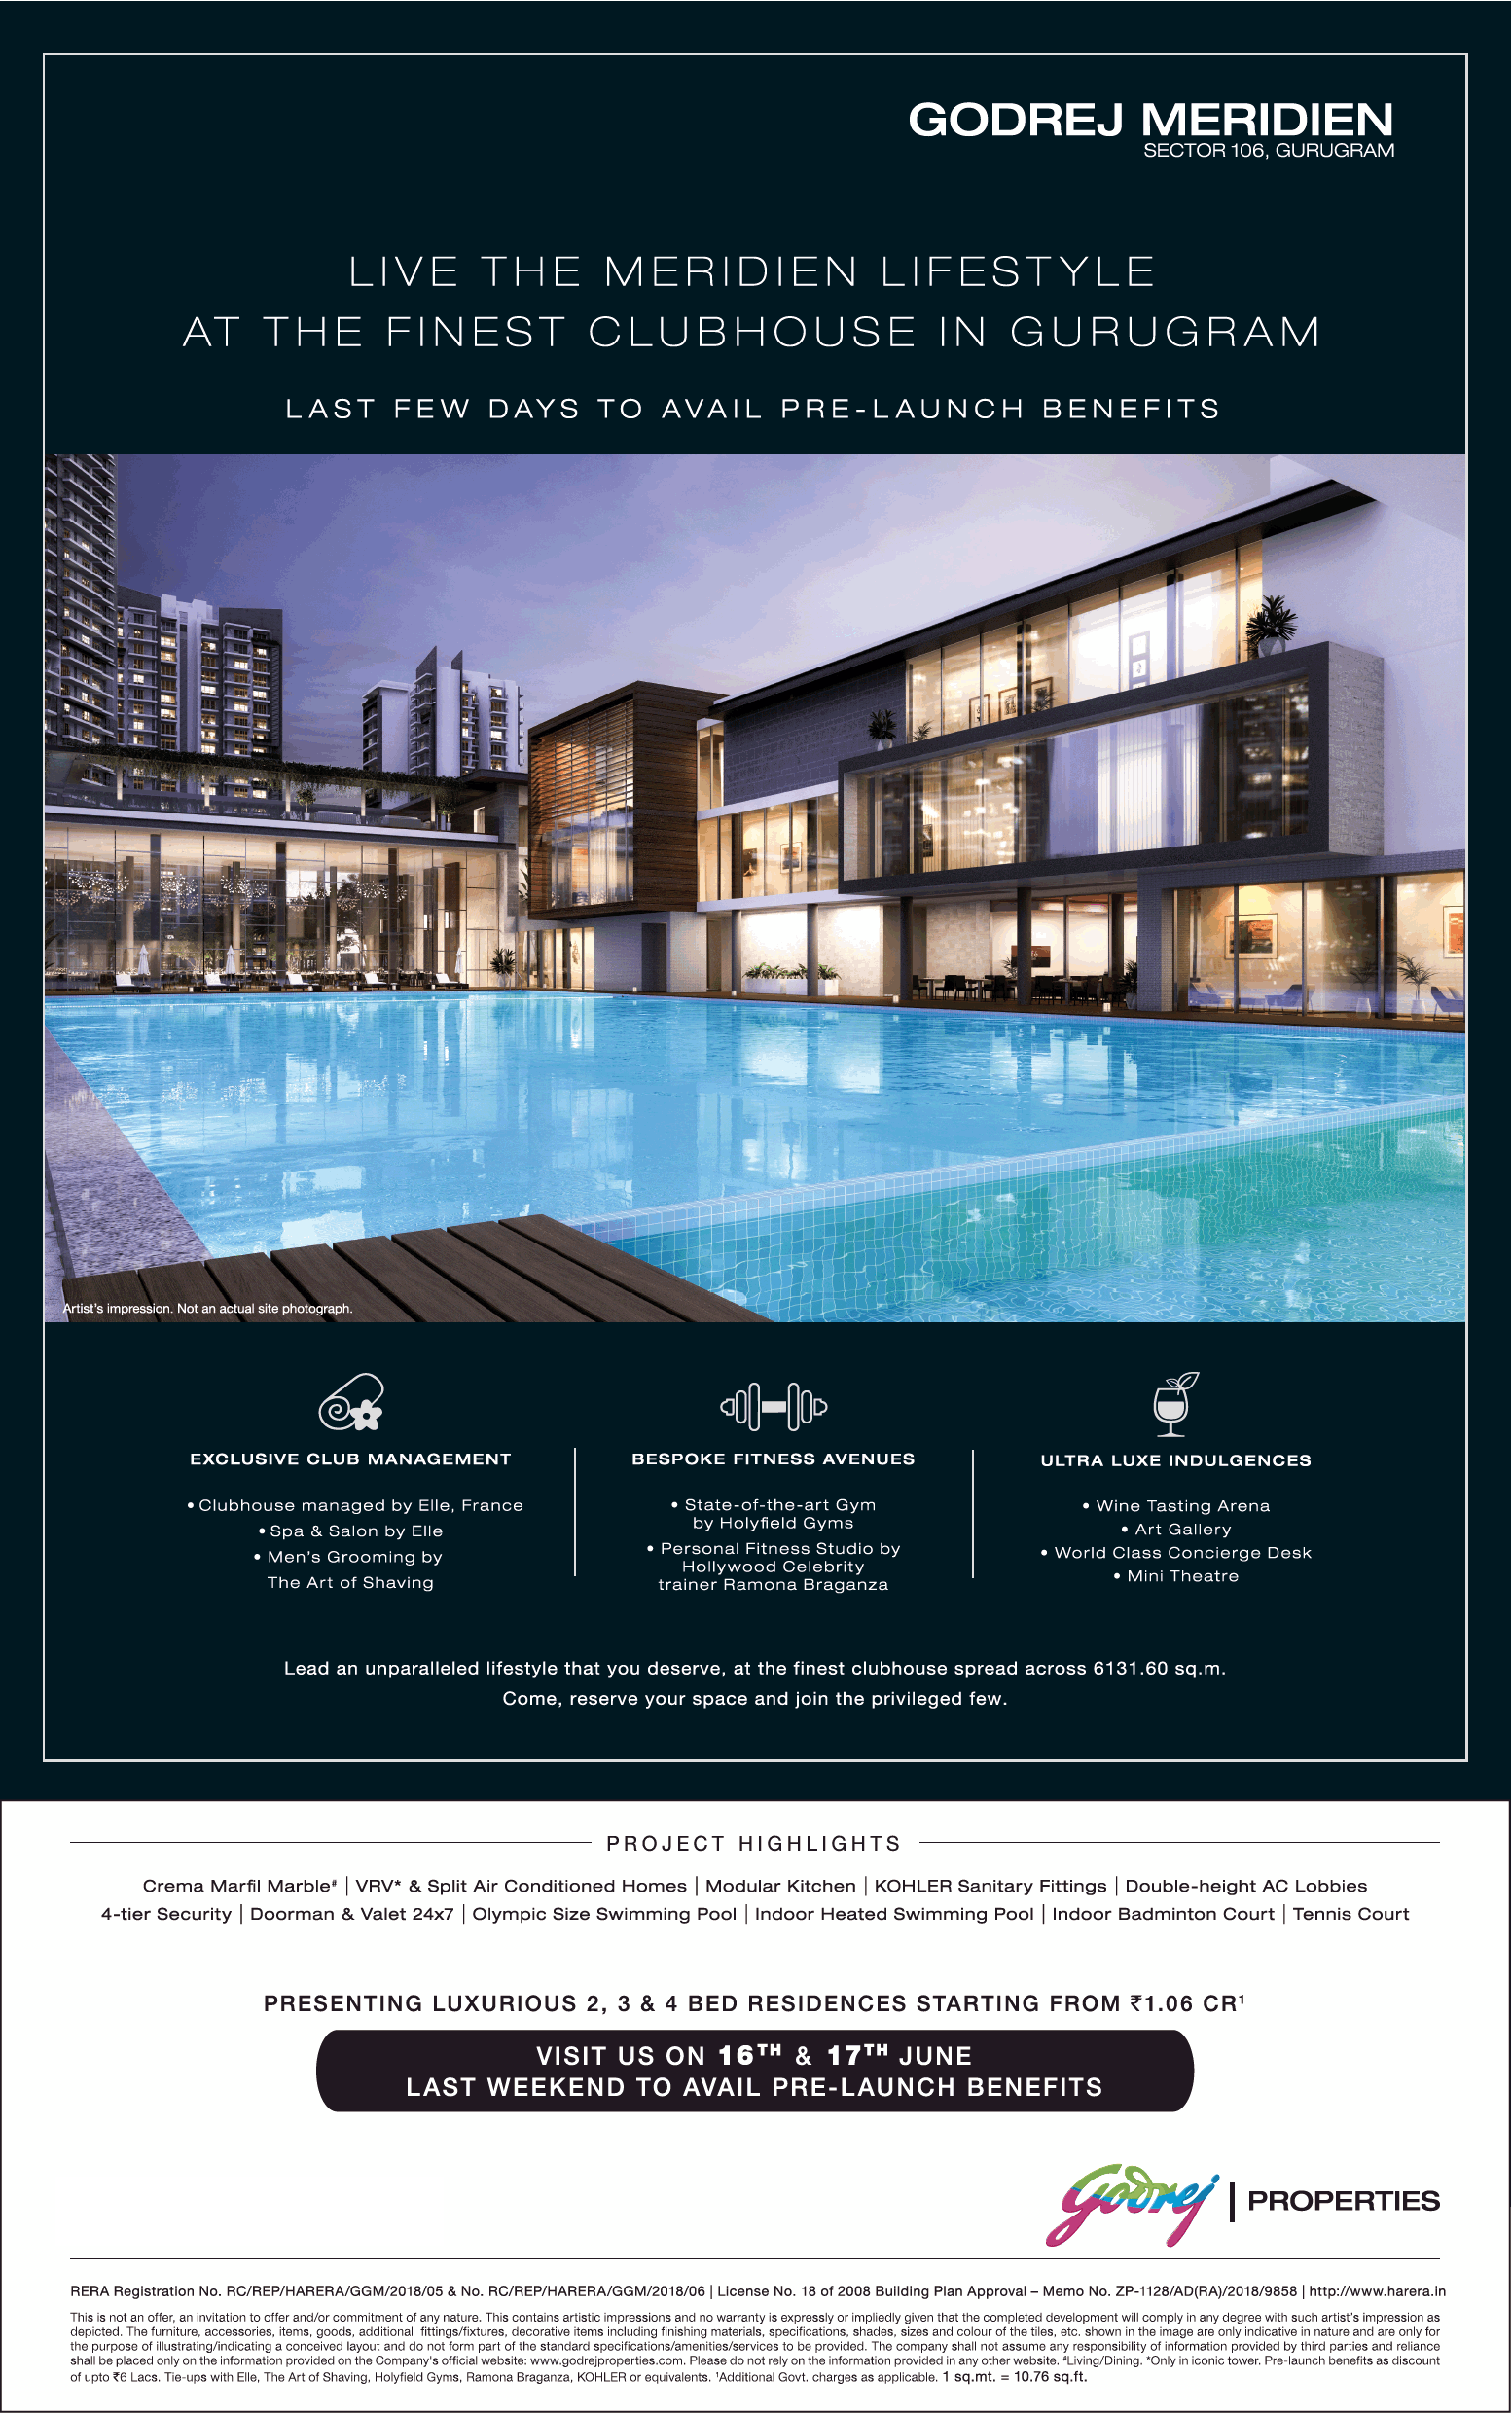 Live the lifestyle at the finest clubhouse in Godrej Meridien in Gurgaon